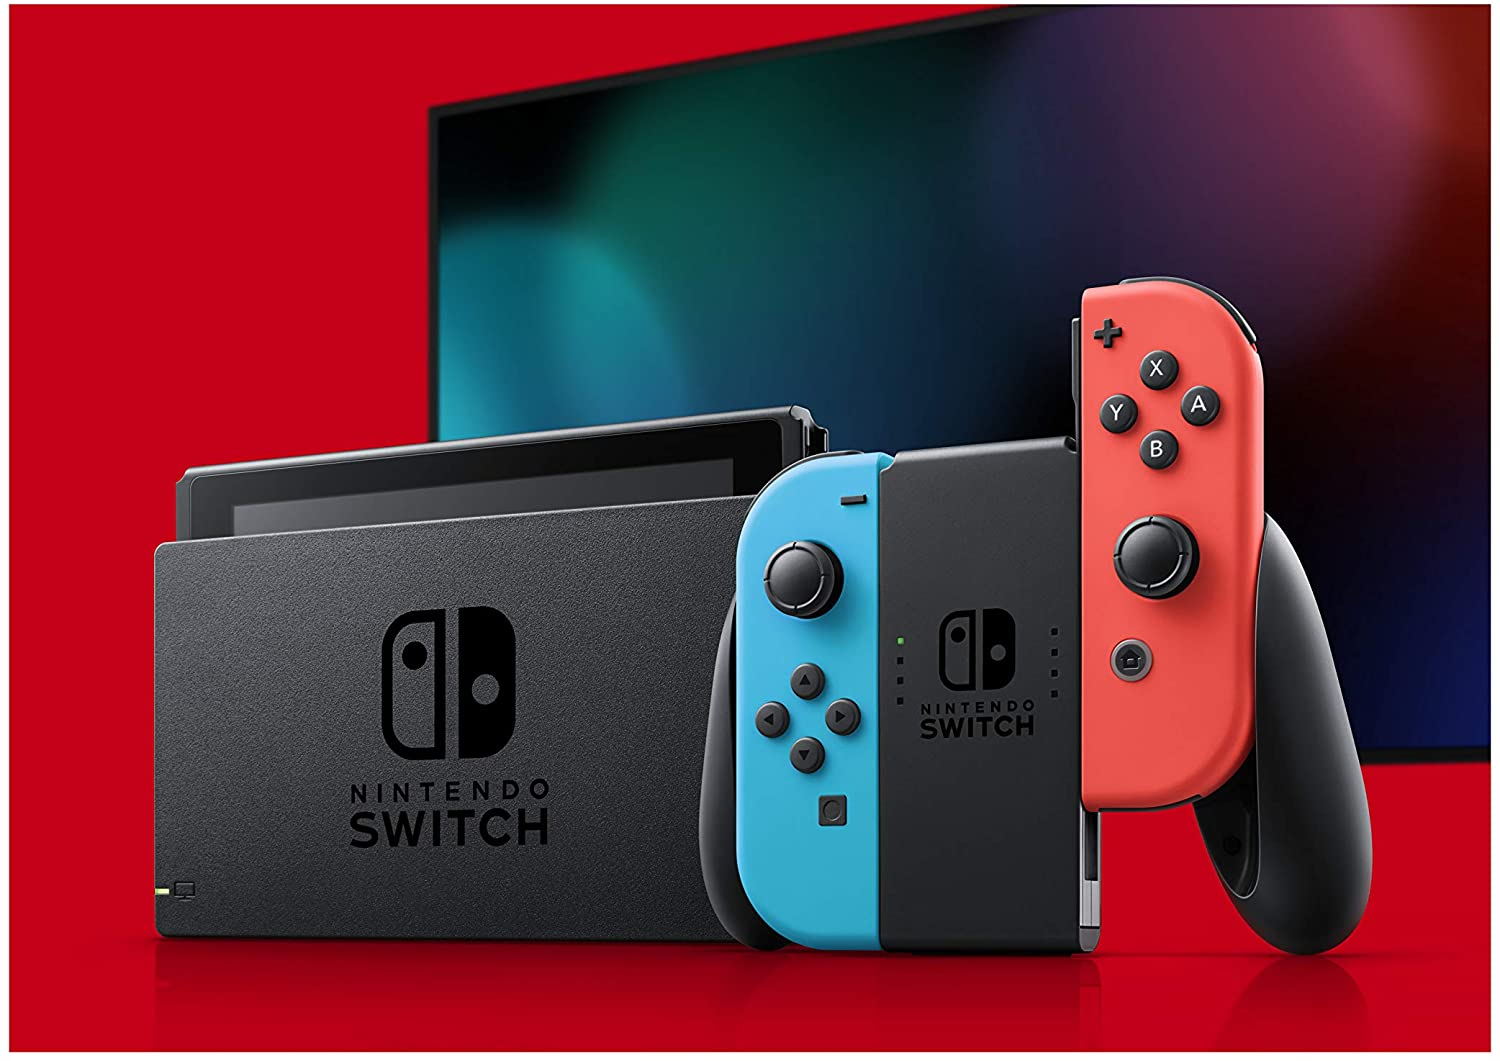 2G89T7R6 Nintendo &Nbsp; Https://Youtu.be/F5Uik5Fgiai &Lt;Ul&Gt; &Lt;Li&Gt;&Lt;Span Class=&Quot;A-List-Item&Quot;&Gt;Play Your Way With The Nintendo Switch Gaming System. Whether You’re At Home Or On The Go, Solo Or With Friends, The Nintendo Switch System Is Designed To Fit Your Life. Dock Your Nintendo Switch To Enjoy Hd Gaming On Your Tv. Heading Out? Just Undock Your Console And Keep Playing In Handheld Mode &Lt;/Span&Gt;&Lt;/Li&Gt; &Lt;Li&Gt;&Lt;Span Class=&Quot;A-List-Item&Quot;&Gt; This Model Includes Battery Life Of Approximately 4.5 To 9 Hours &Lt;/Span&Gt;&Lt;/Li&Gt; &Lt;Li&Gt;&Lt;Span Class=&Quot;A-List-Item&Quot;&Gt; The Battery Life Will Depend On The Games You Play. For Instance, The Battery Will Last Approximately 5.5 Hours For The Legend Of Zelda: Breath Of The Wild (Games Sold Separately) &Lt;/Span&Gt;&Lt;/Li&Gt; &Lt;/Ul&Gt; &Nbsp; Nintendo Switch V2 With Neon Blue And Neon Red Joy‑Con 32Gb Gaming Console